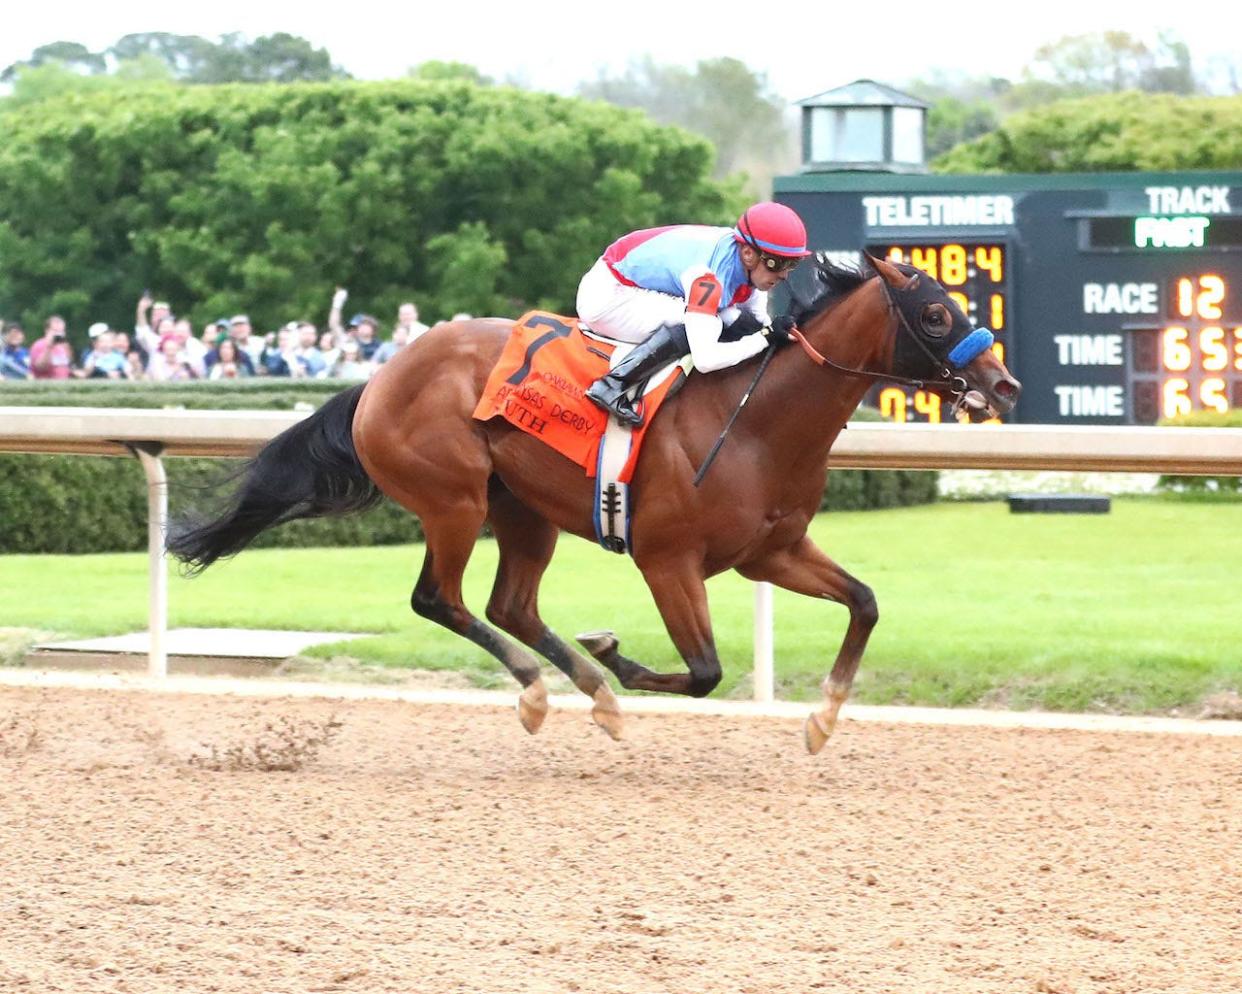 Muth and jockey Juan Hernandez win the Arkansas Derby on March 30 at Oaklawn Park.